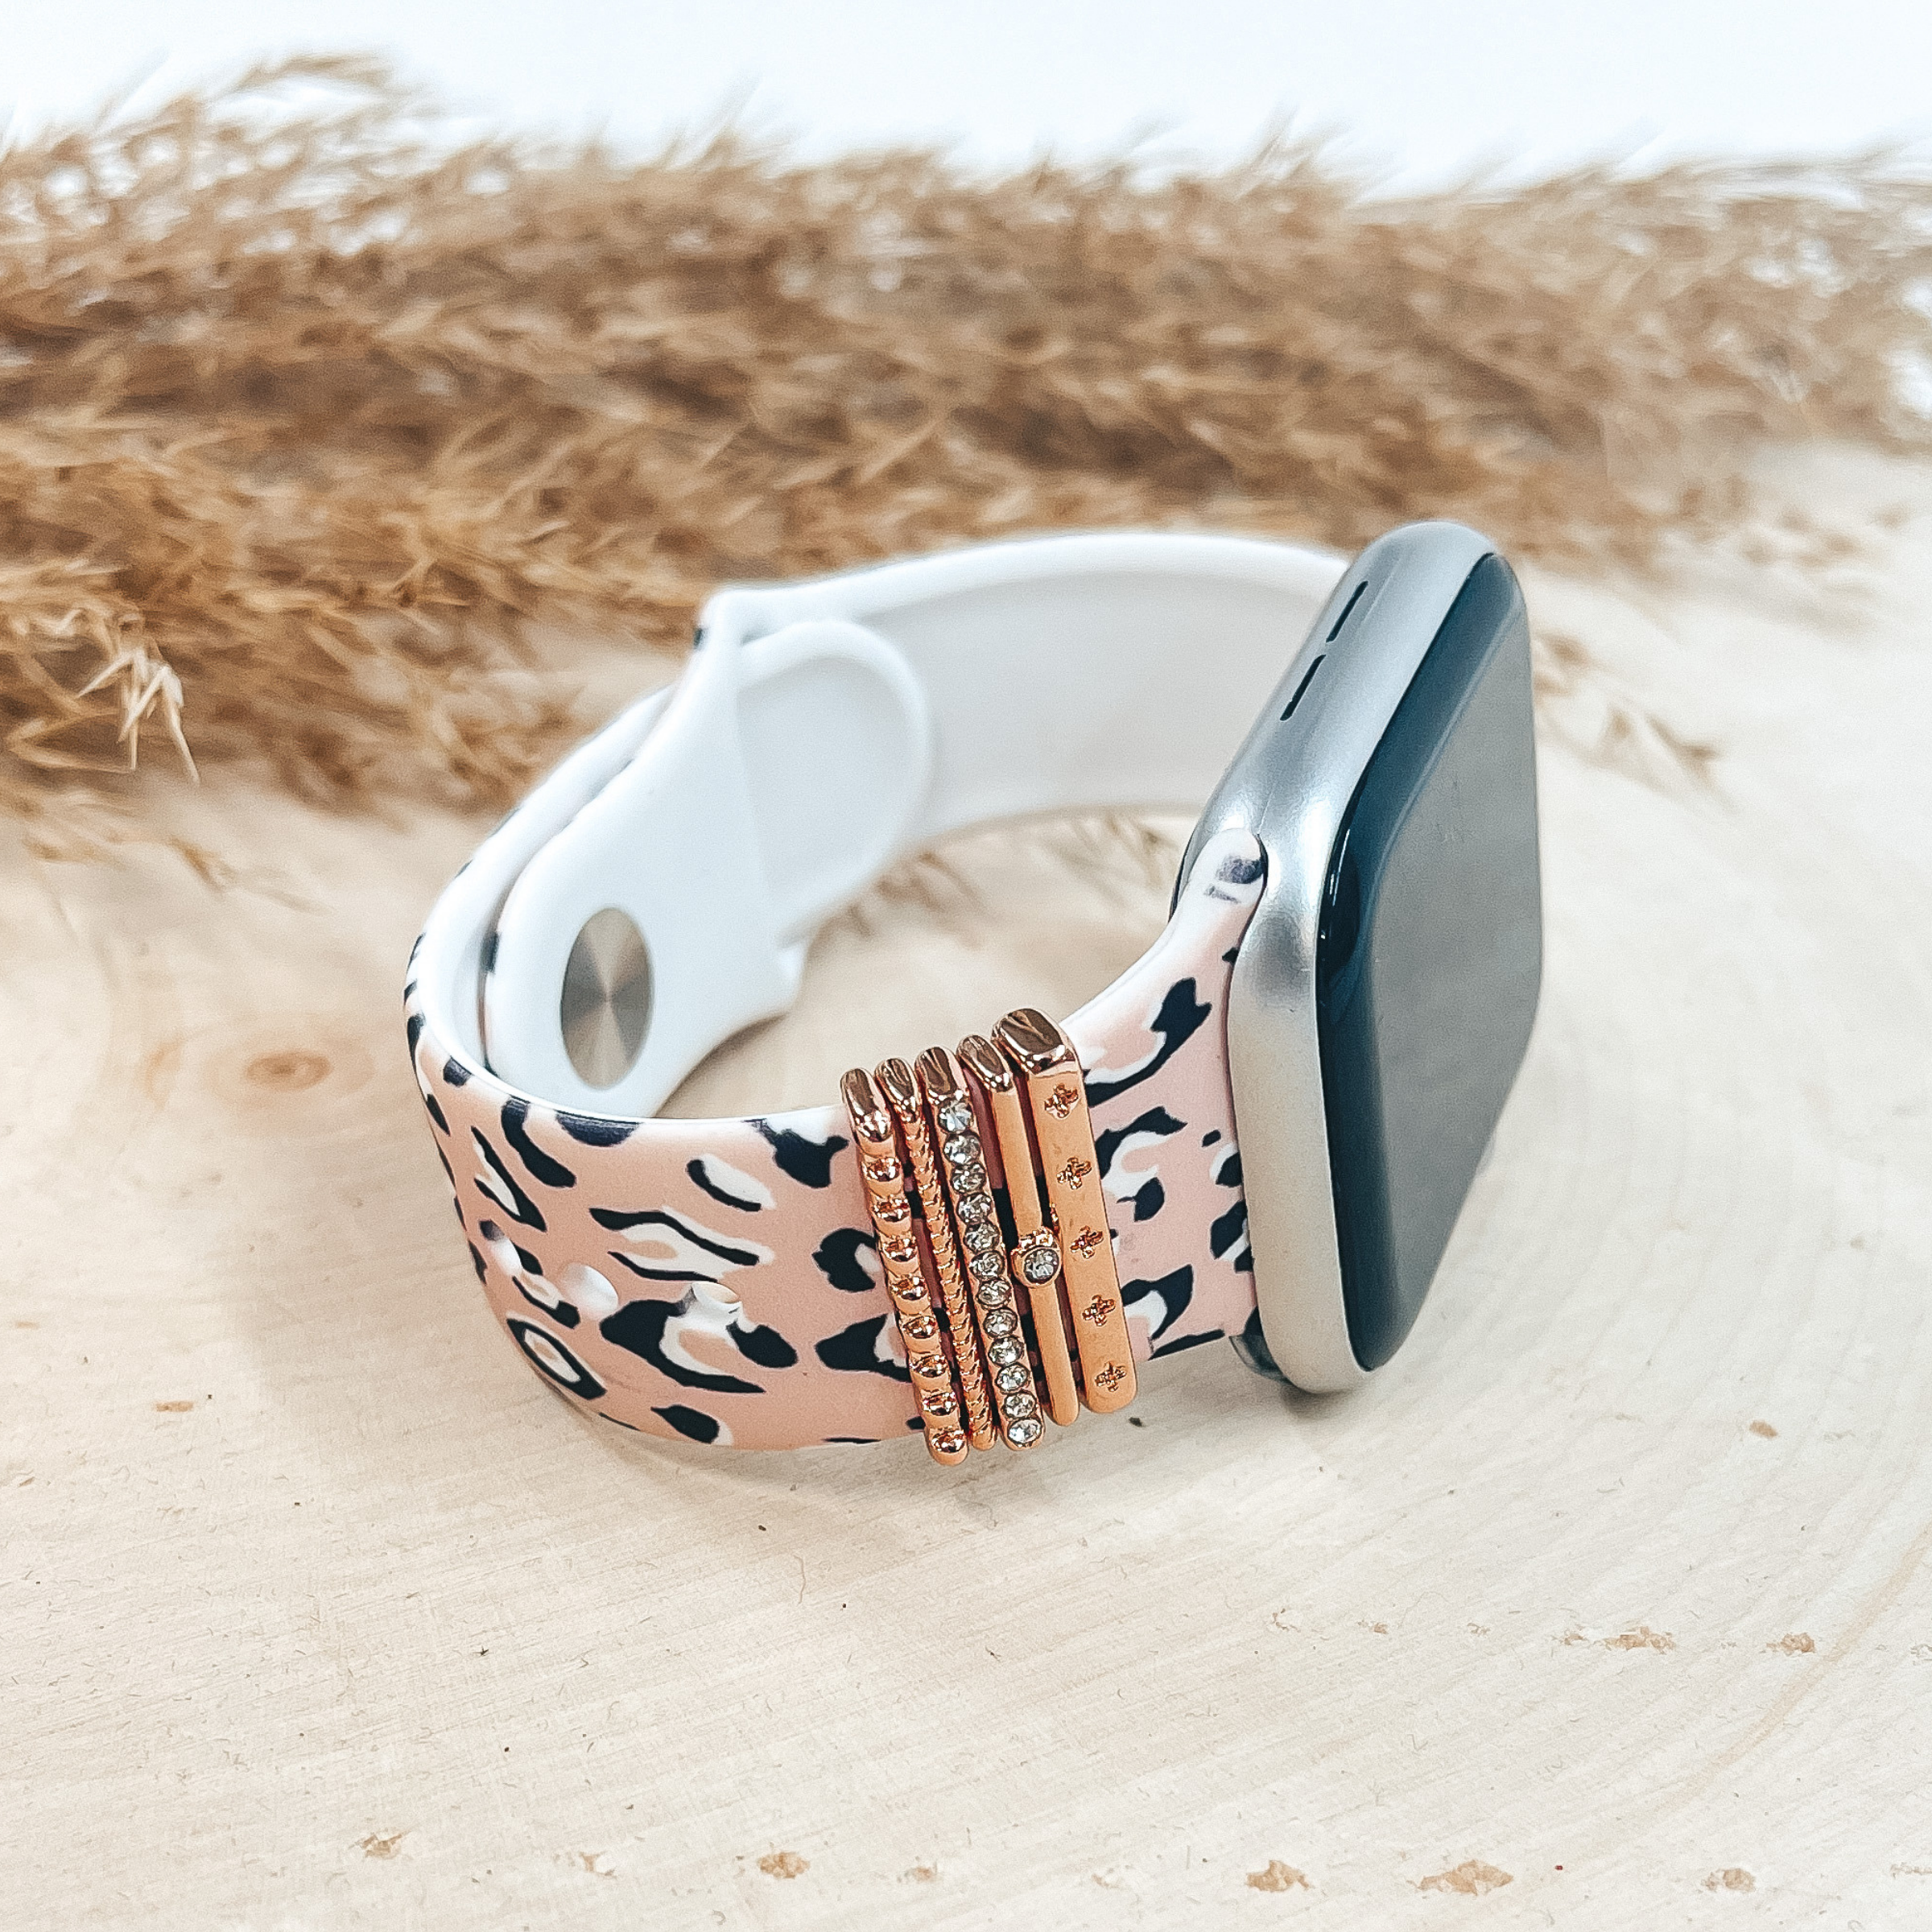 Smart Watch Band With Rose Gold Tone Crystal Set Rings with Leopard Print Design in Blush Pink - Giddy Up Glamour Boutique